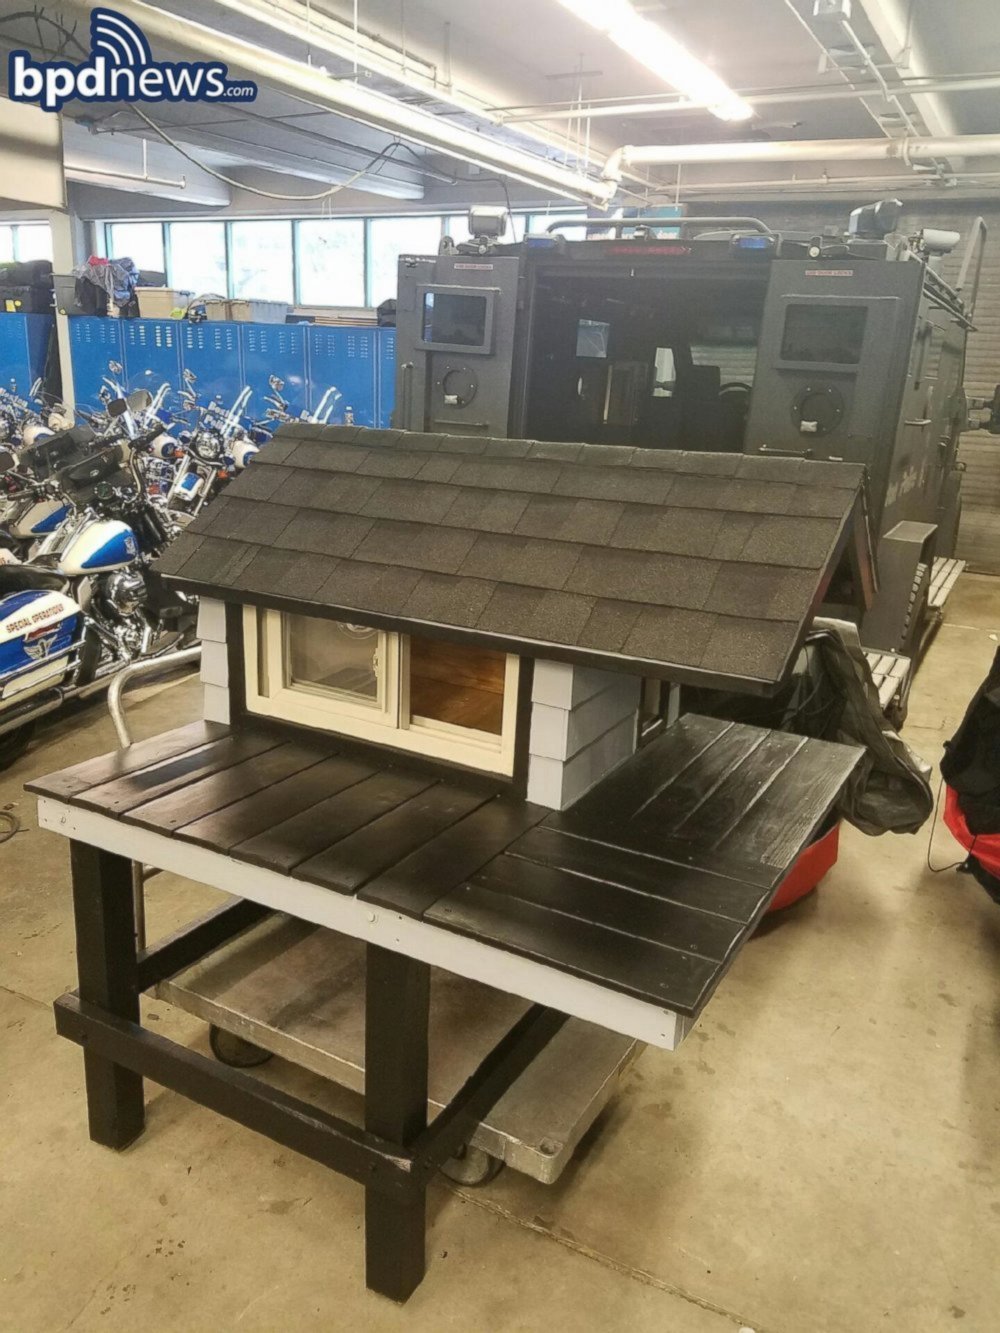 PHOTO: Boston Police Department built a kitty condo for a stray Calico cat, dubbed "SWAT cat" that they've been caring for since 2013.